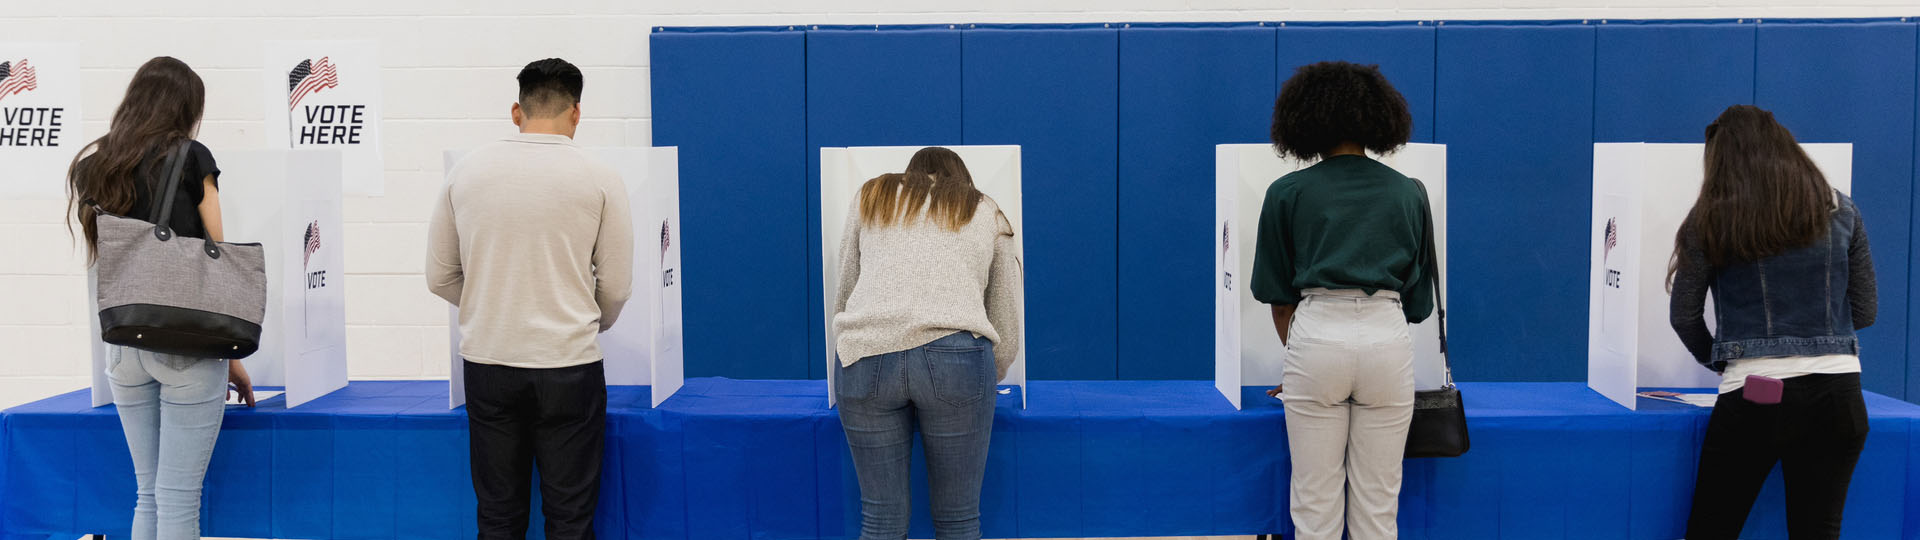 Long shot of several people voting at a polling place